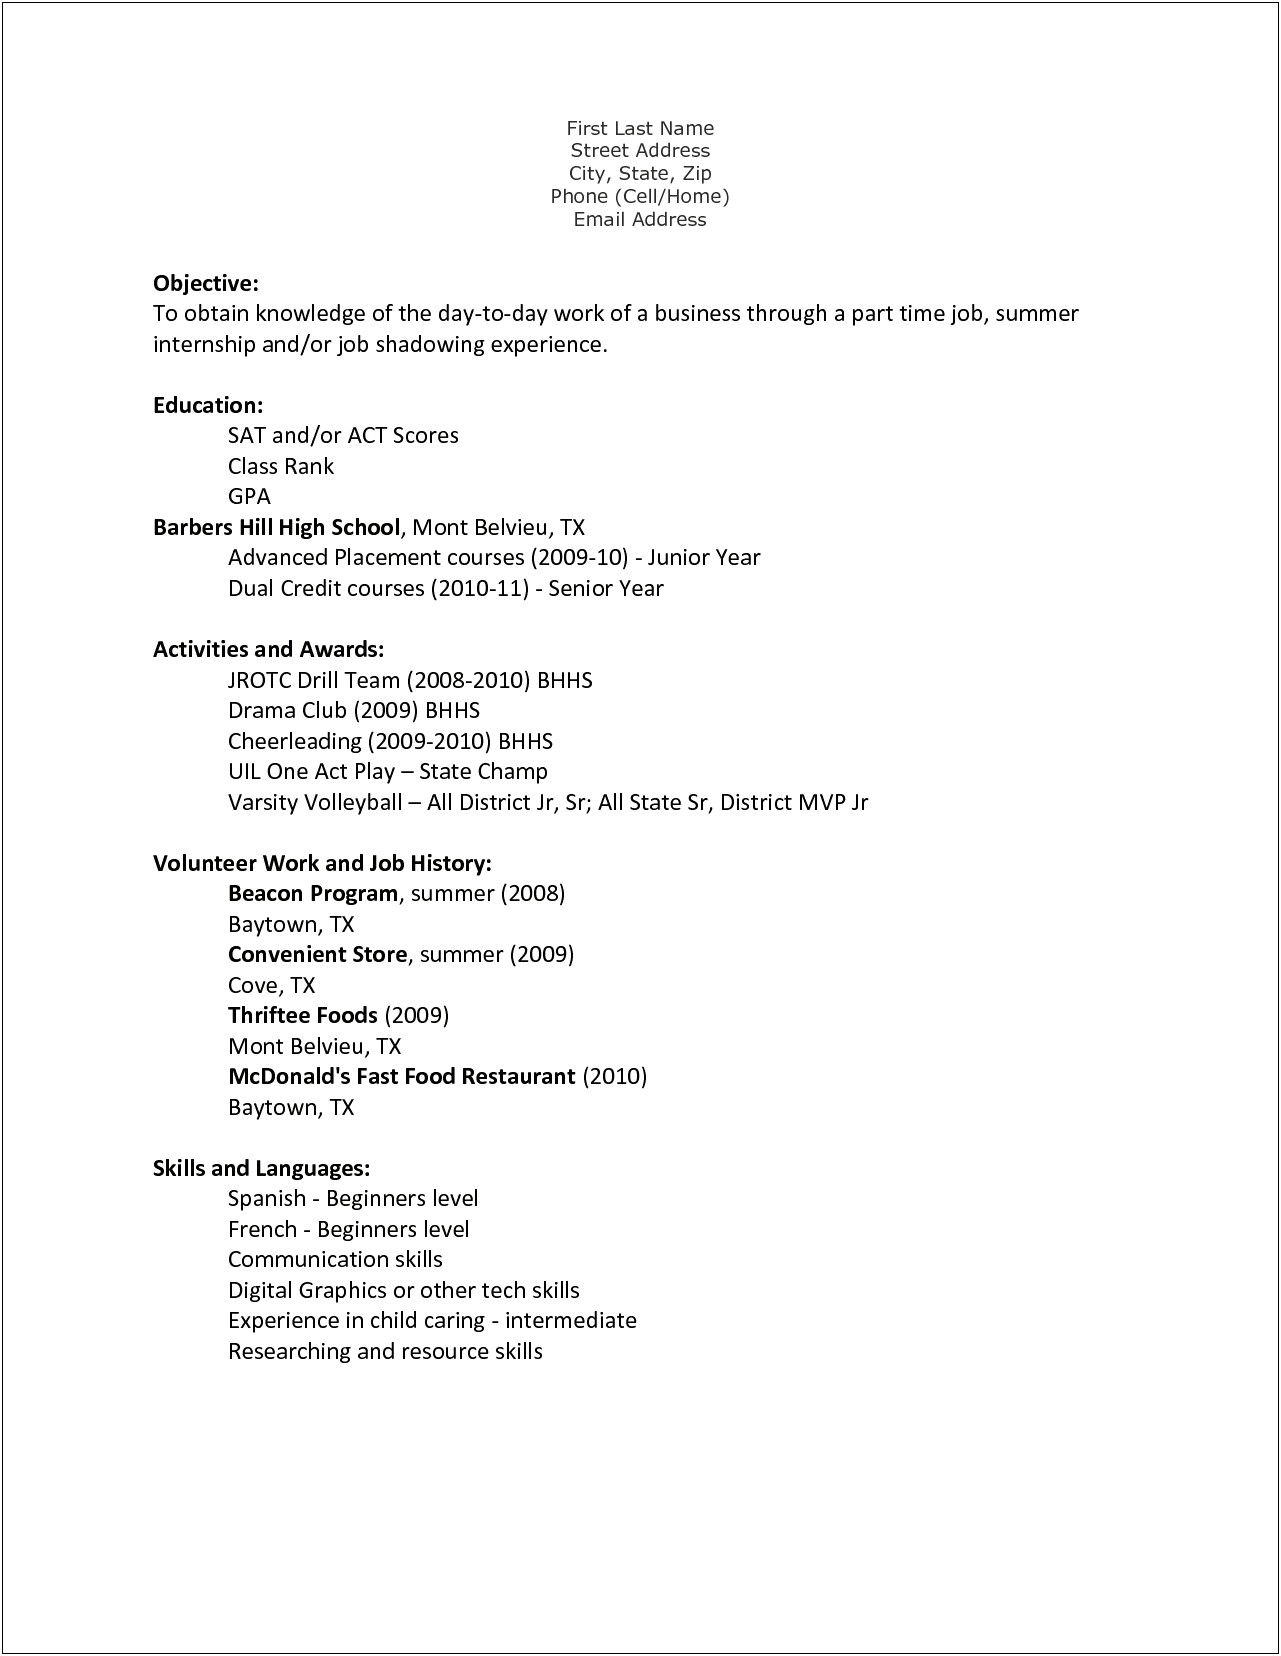 Dual Enrollment In Resume For High School Student